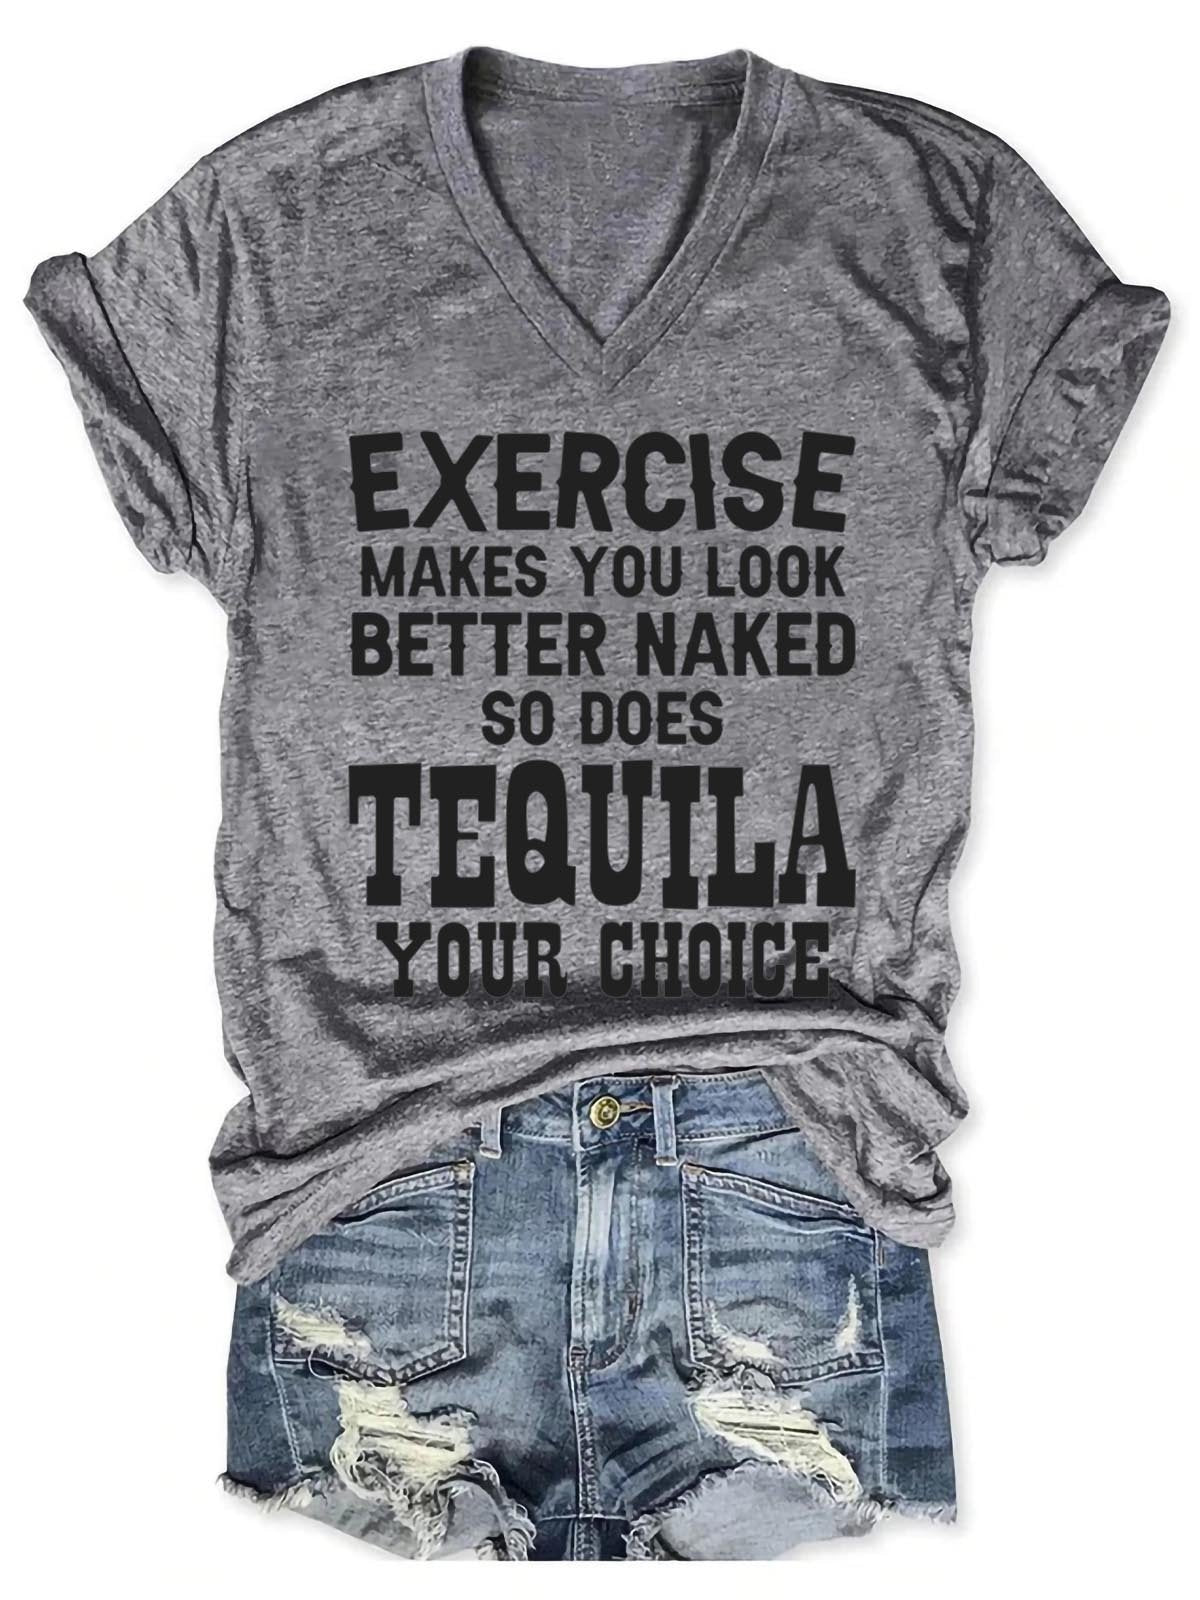 Women's Exercise Makes You Look Better Naked So Does Tequila Your Choice V-Neck T-Shirt - Outlets Forever